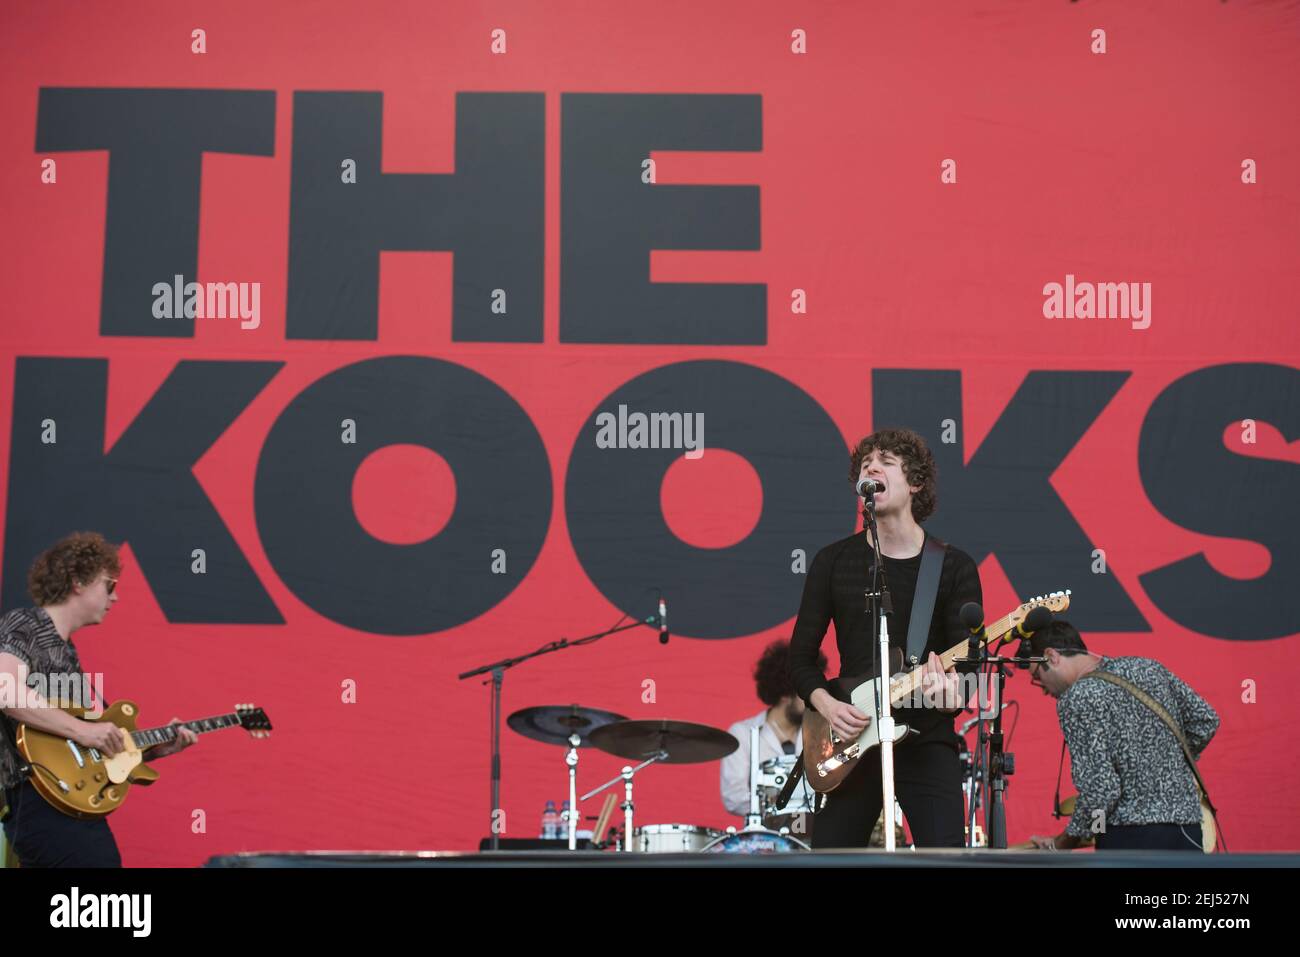 Luke Pritchard of The Kooks performs live on stage on day 3 of the Isle of Wight Festival 2017, Seaclose Park, Isle of Wight. Picture date: Saturday 10th June 2017.  Photo credit should read: © DavidJensen Stock Photo